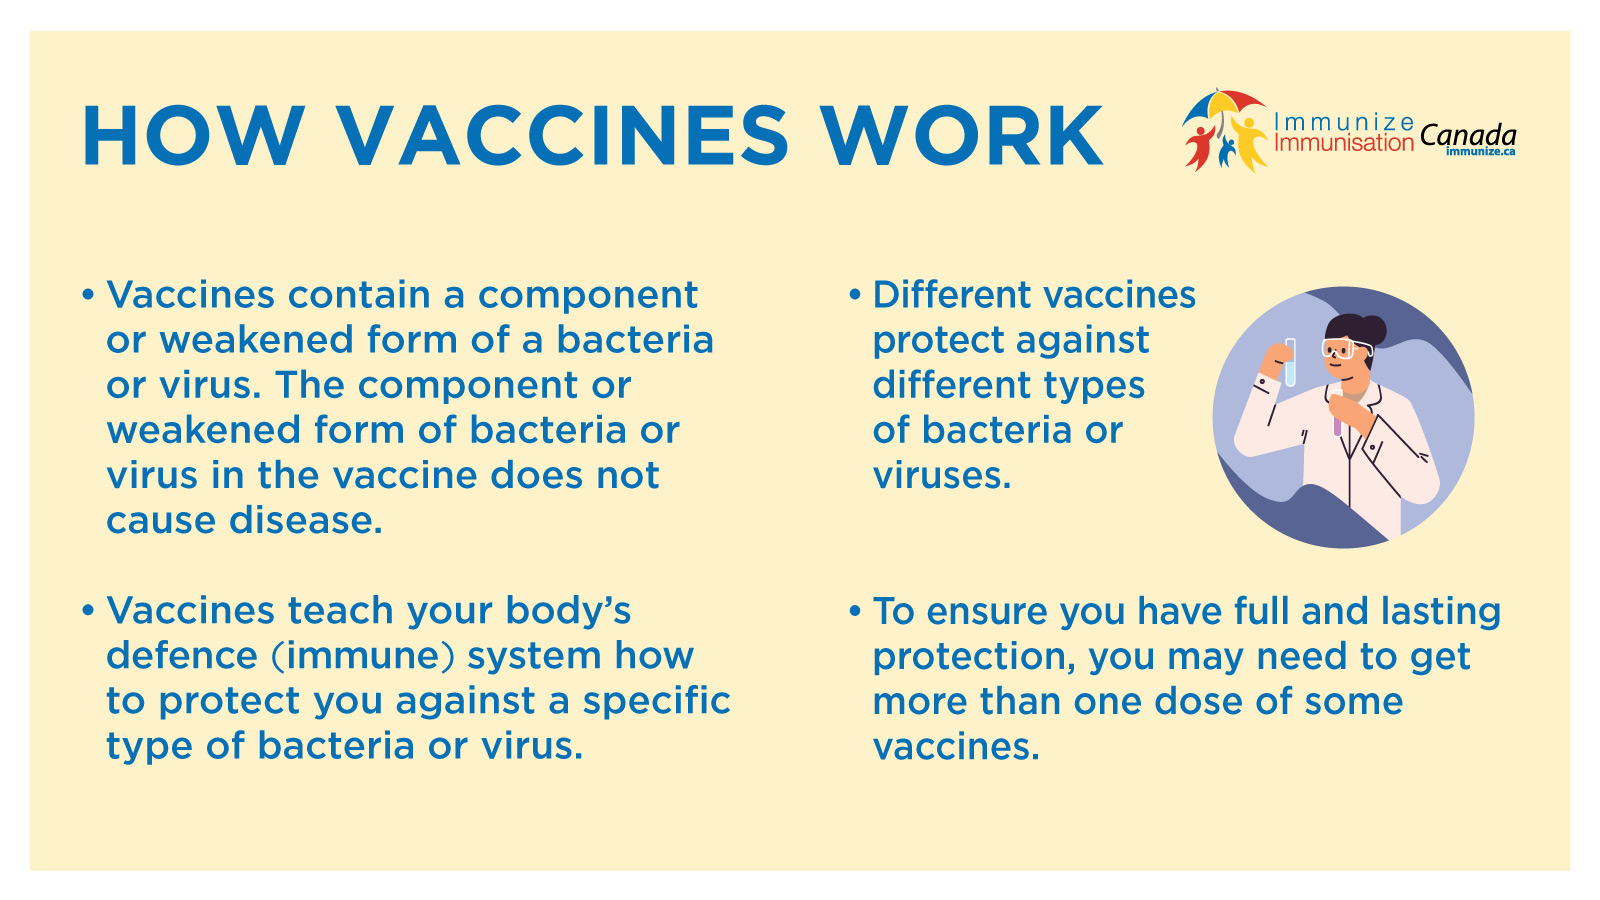 How Vaccines Work - social media image for Twitter